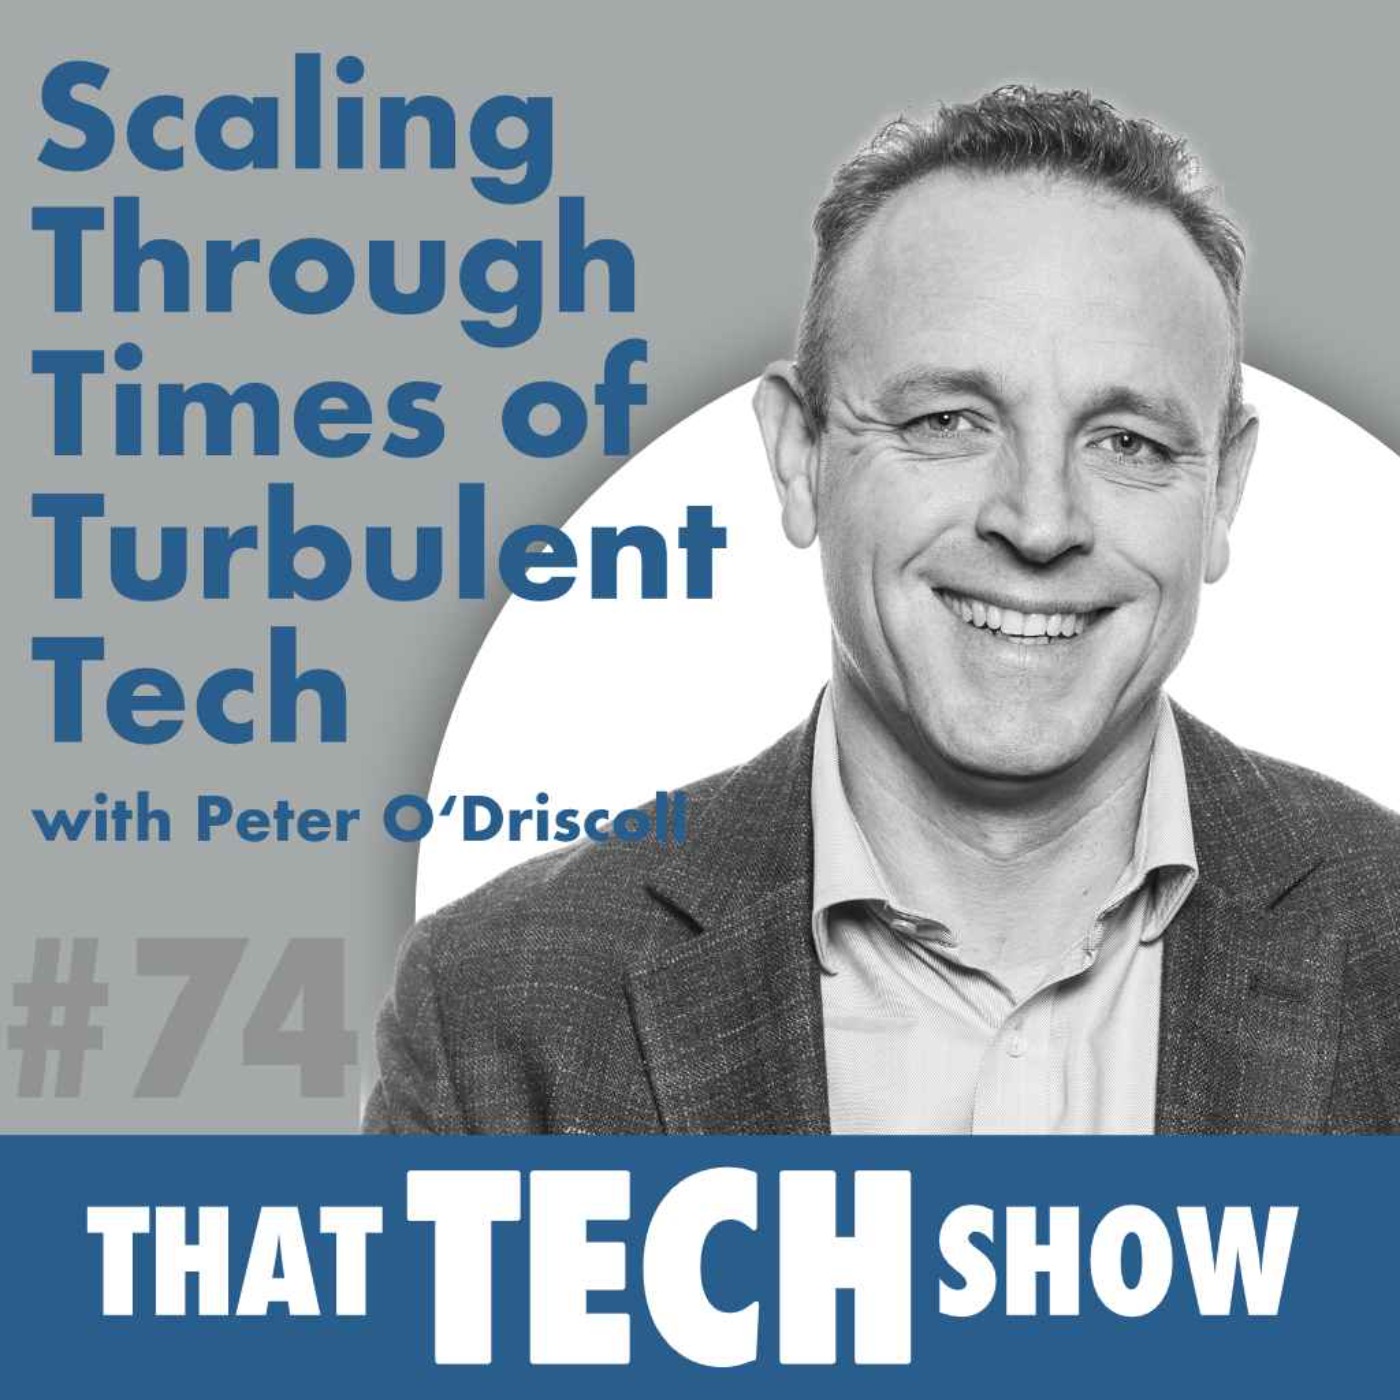 Episode 74 - Scaling Through Times of Turbulent Tech with Peter O’Driscoll